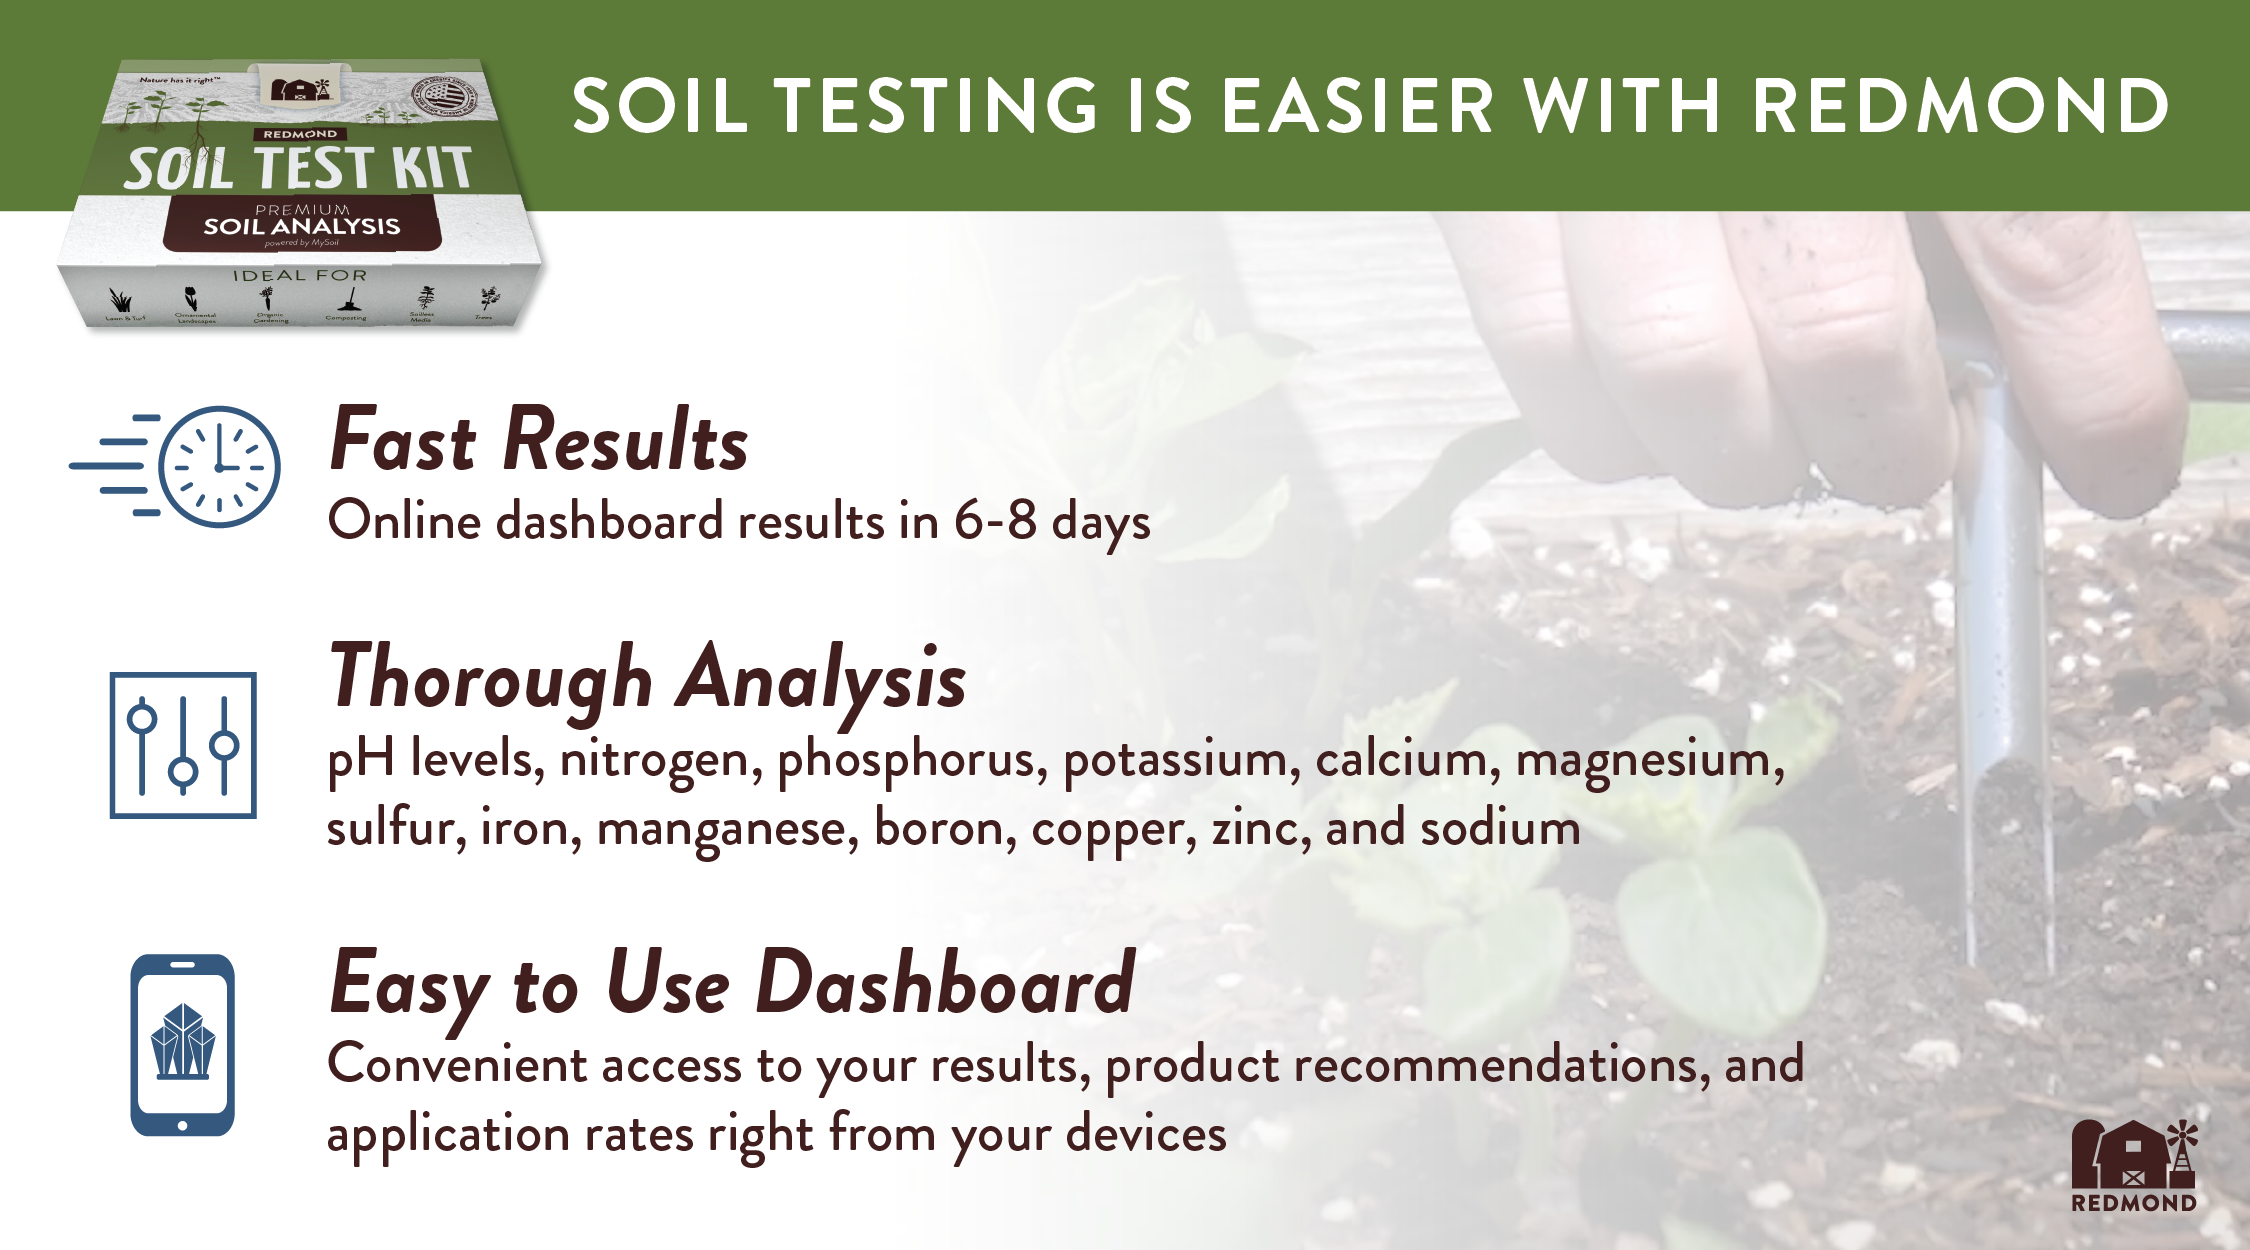 At Home Soil Test Kit with Professional Soil Analysis